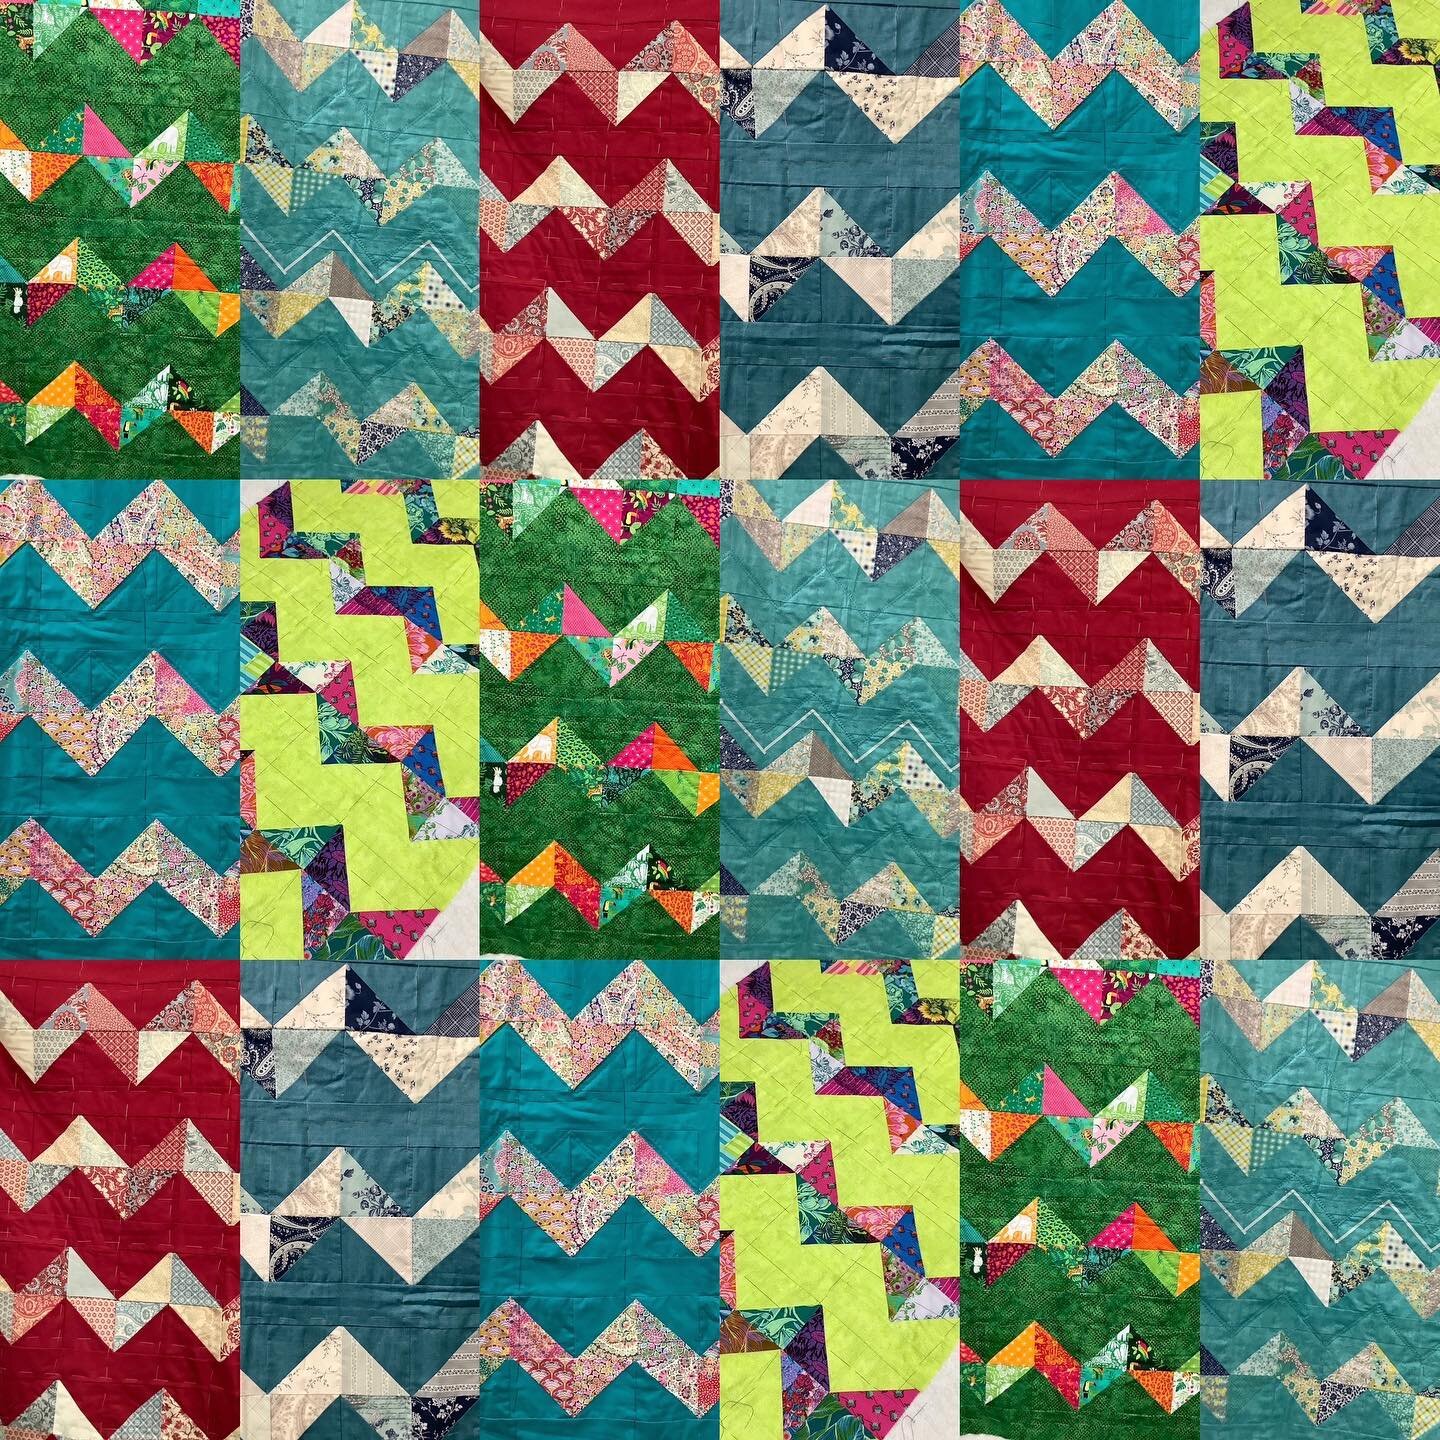 A patchwork of patchwork. Six more quilters were released into the wild last night as my Snake Charmer beginners&rsquo; quilt course came to an end.

This group have really enjoyed stitching together. So they&rsquo;re planning to block book another w